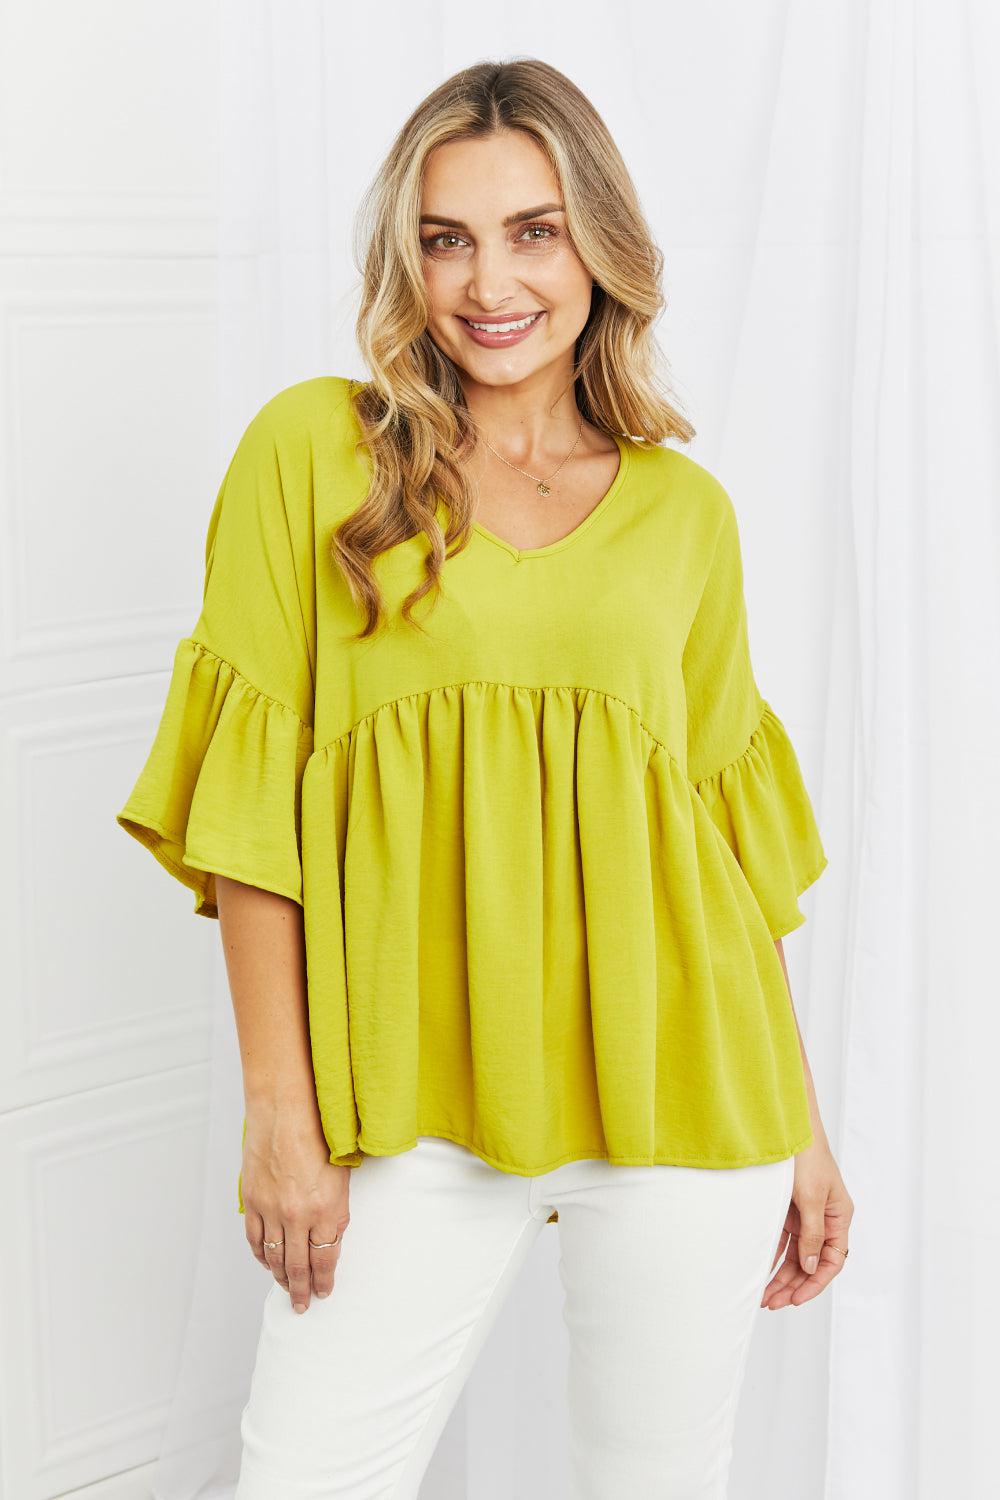 Blue Zone Planet |  Celeste Look At Me Full Size Flowy Ruffle Sleeve Top in Lime BLUE ZONE PLANET